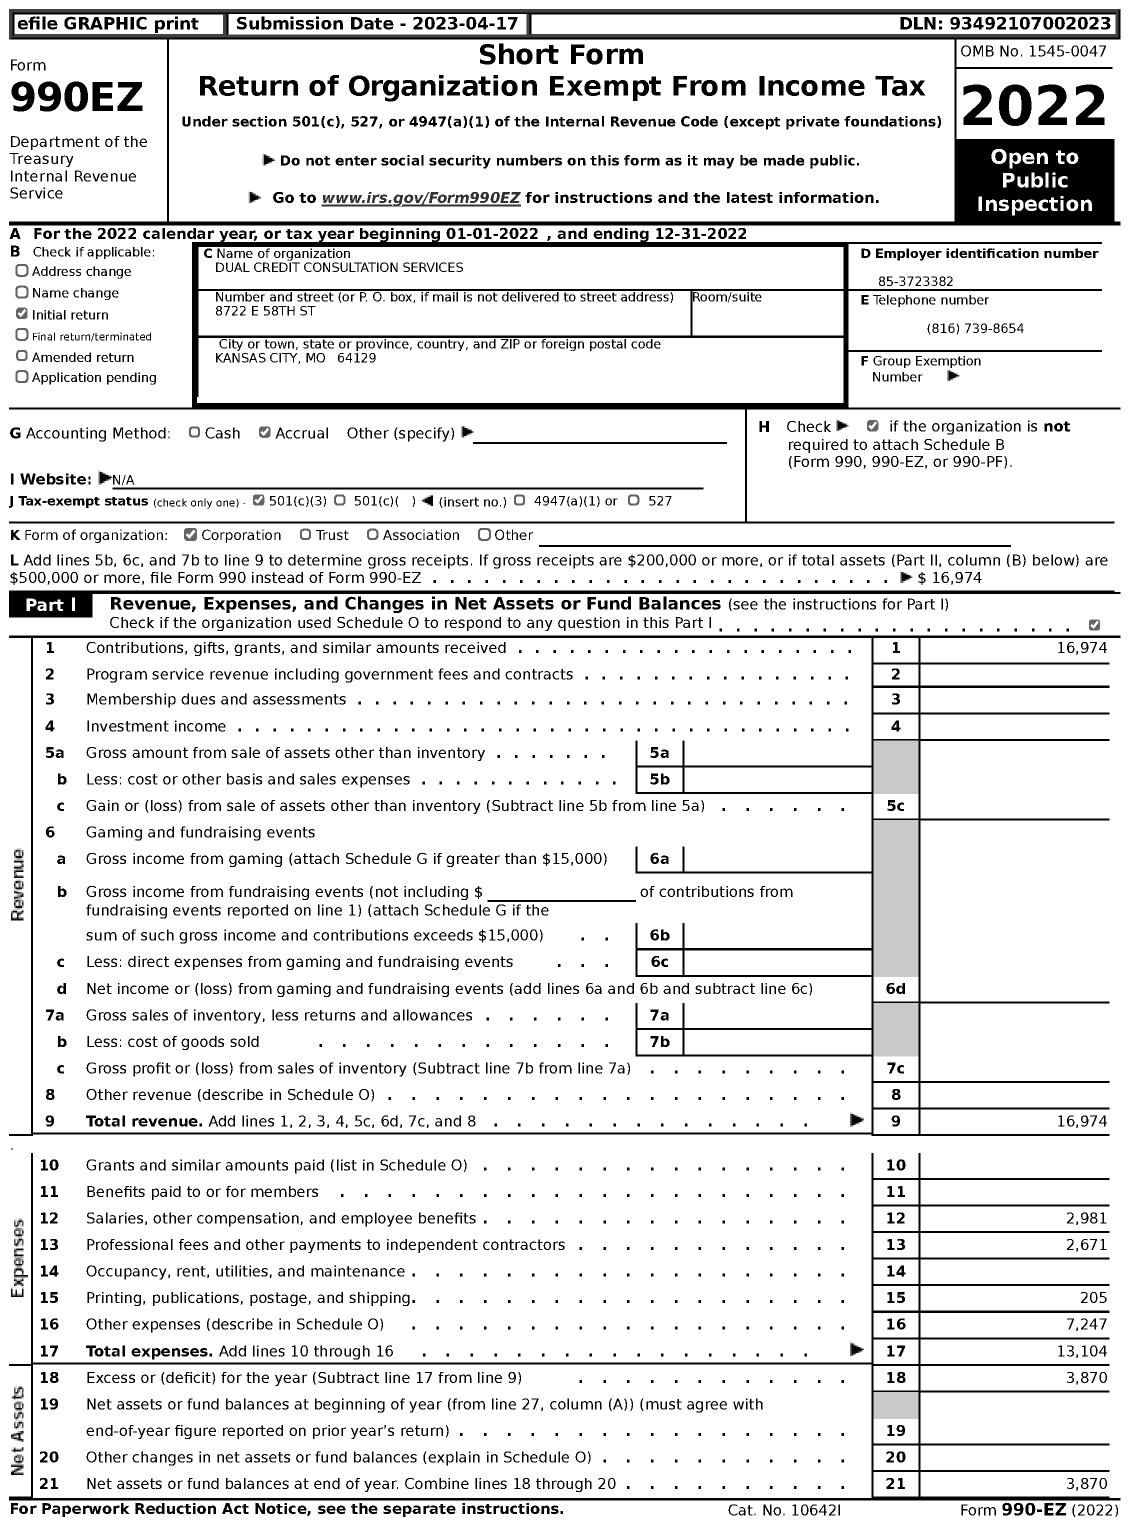 Image of first page of 2022 Form 990EZ for Dual Credit Consultation Services (DCCS)